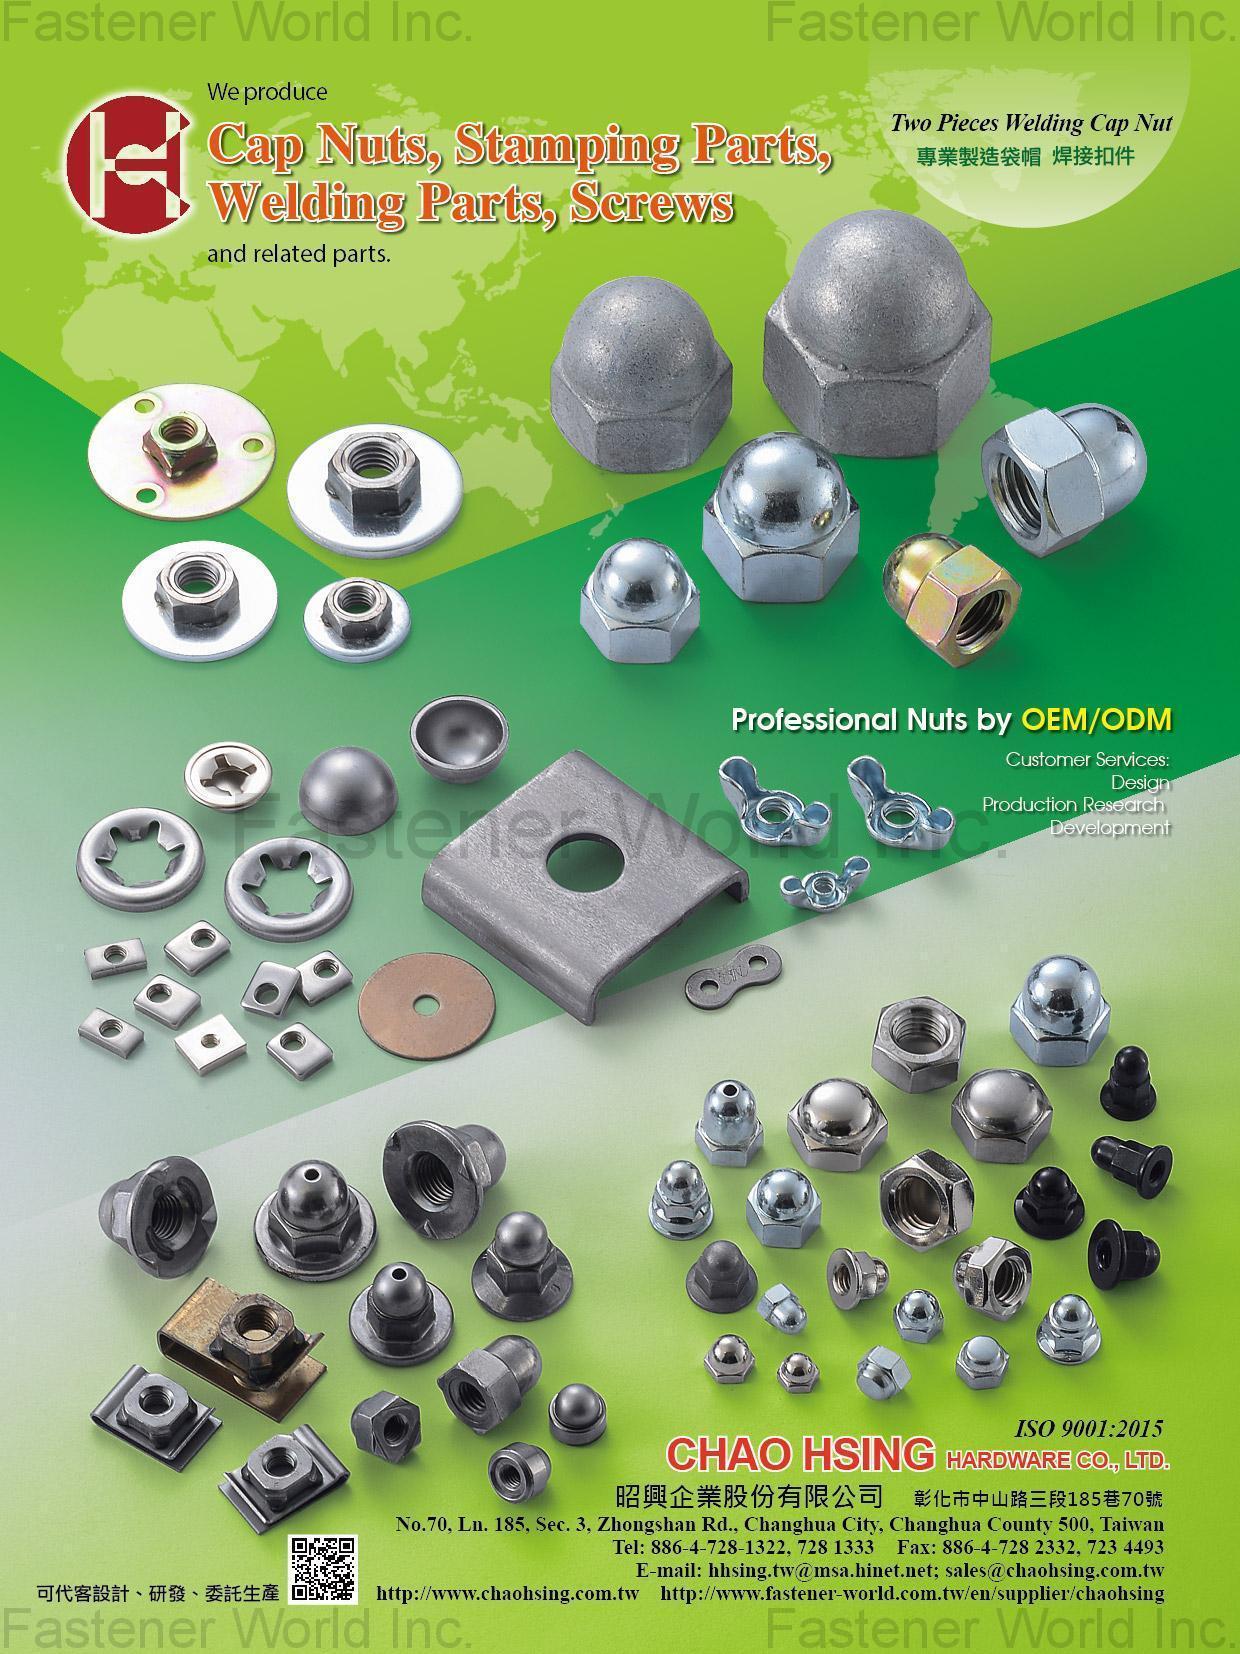 CHAO HSING HARDWARE CO., LTD.  , Cap Nuts, Stamping Parts, Welding Fasteners , Cap Nuts